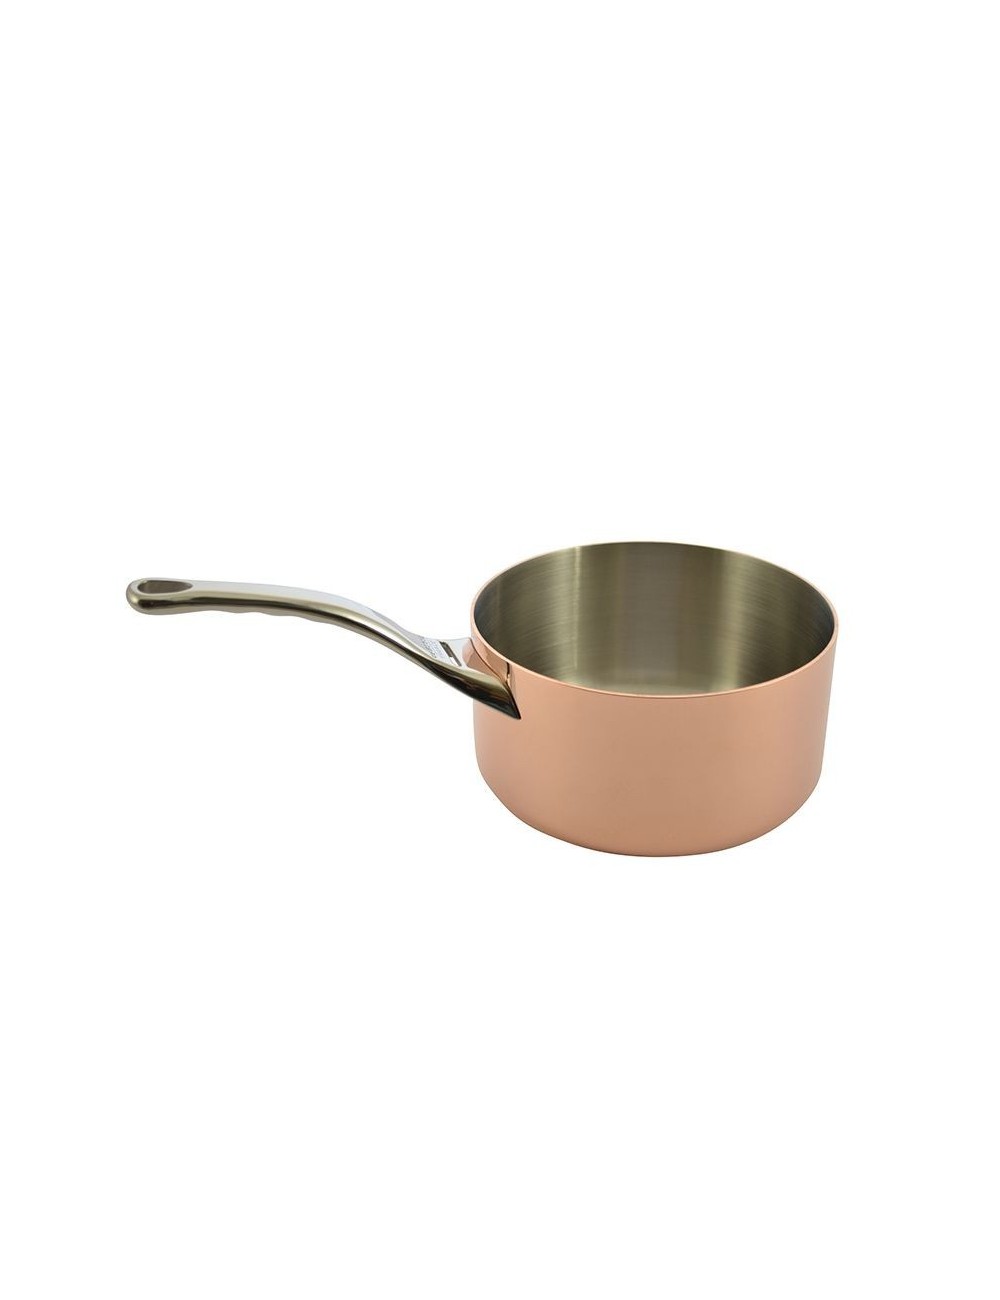 Gas, Electric & Stovetops Cooking for Soup Pasta & Reheat Food Compatible for Induction SHINEURI 2 1/2 qt Copper Saucepan with Lid Sauce Mini Saute Pan with Stainless Steel Handle Stew 